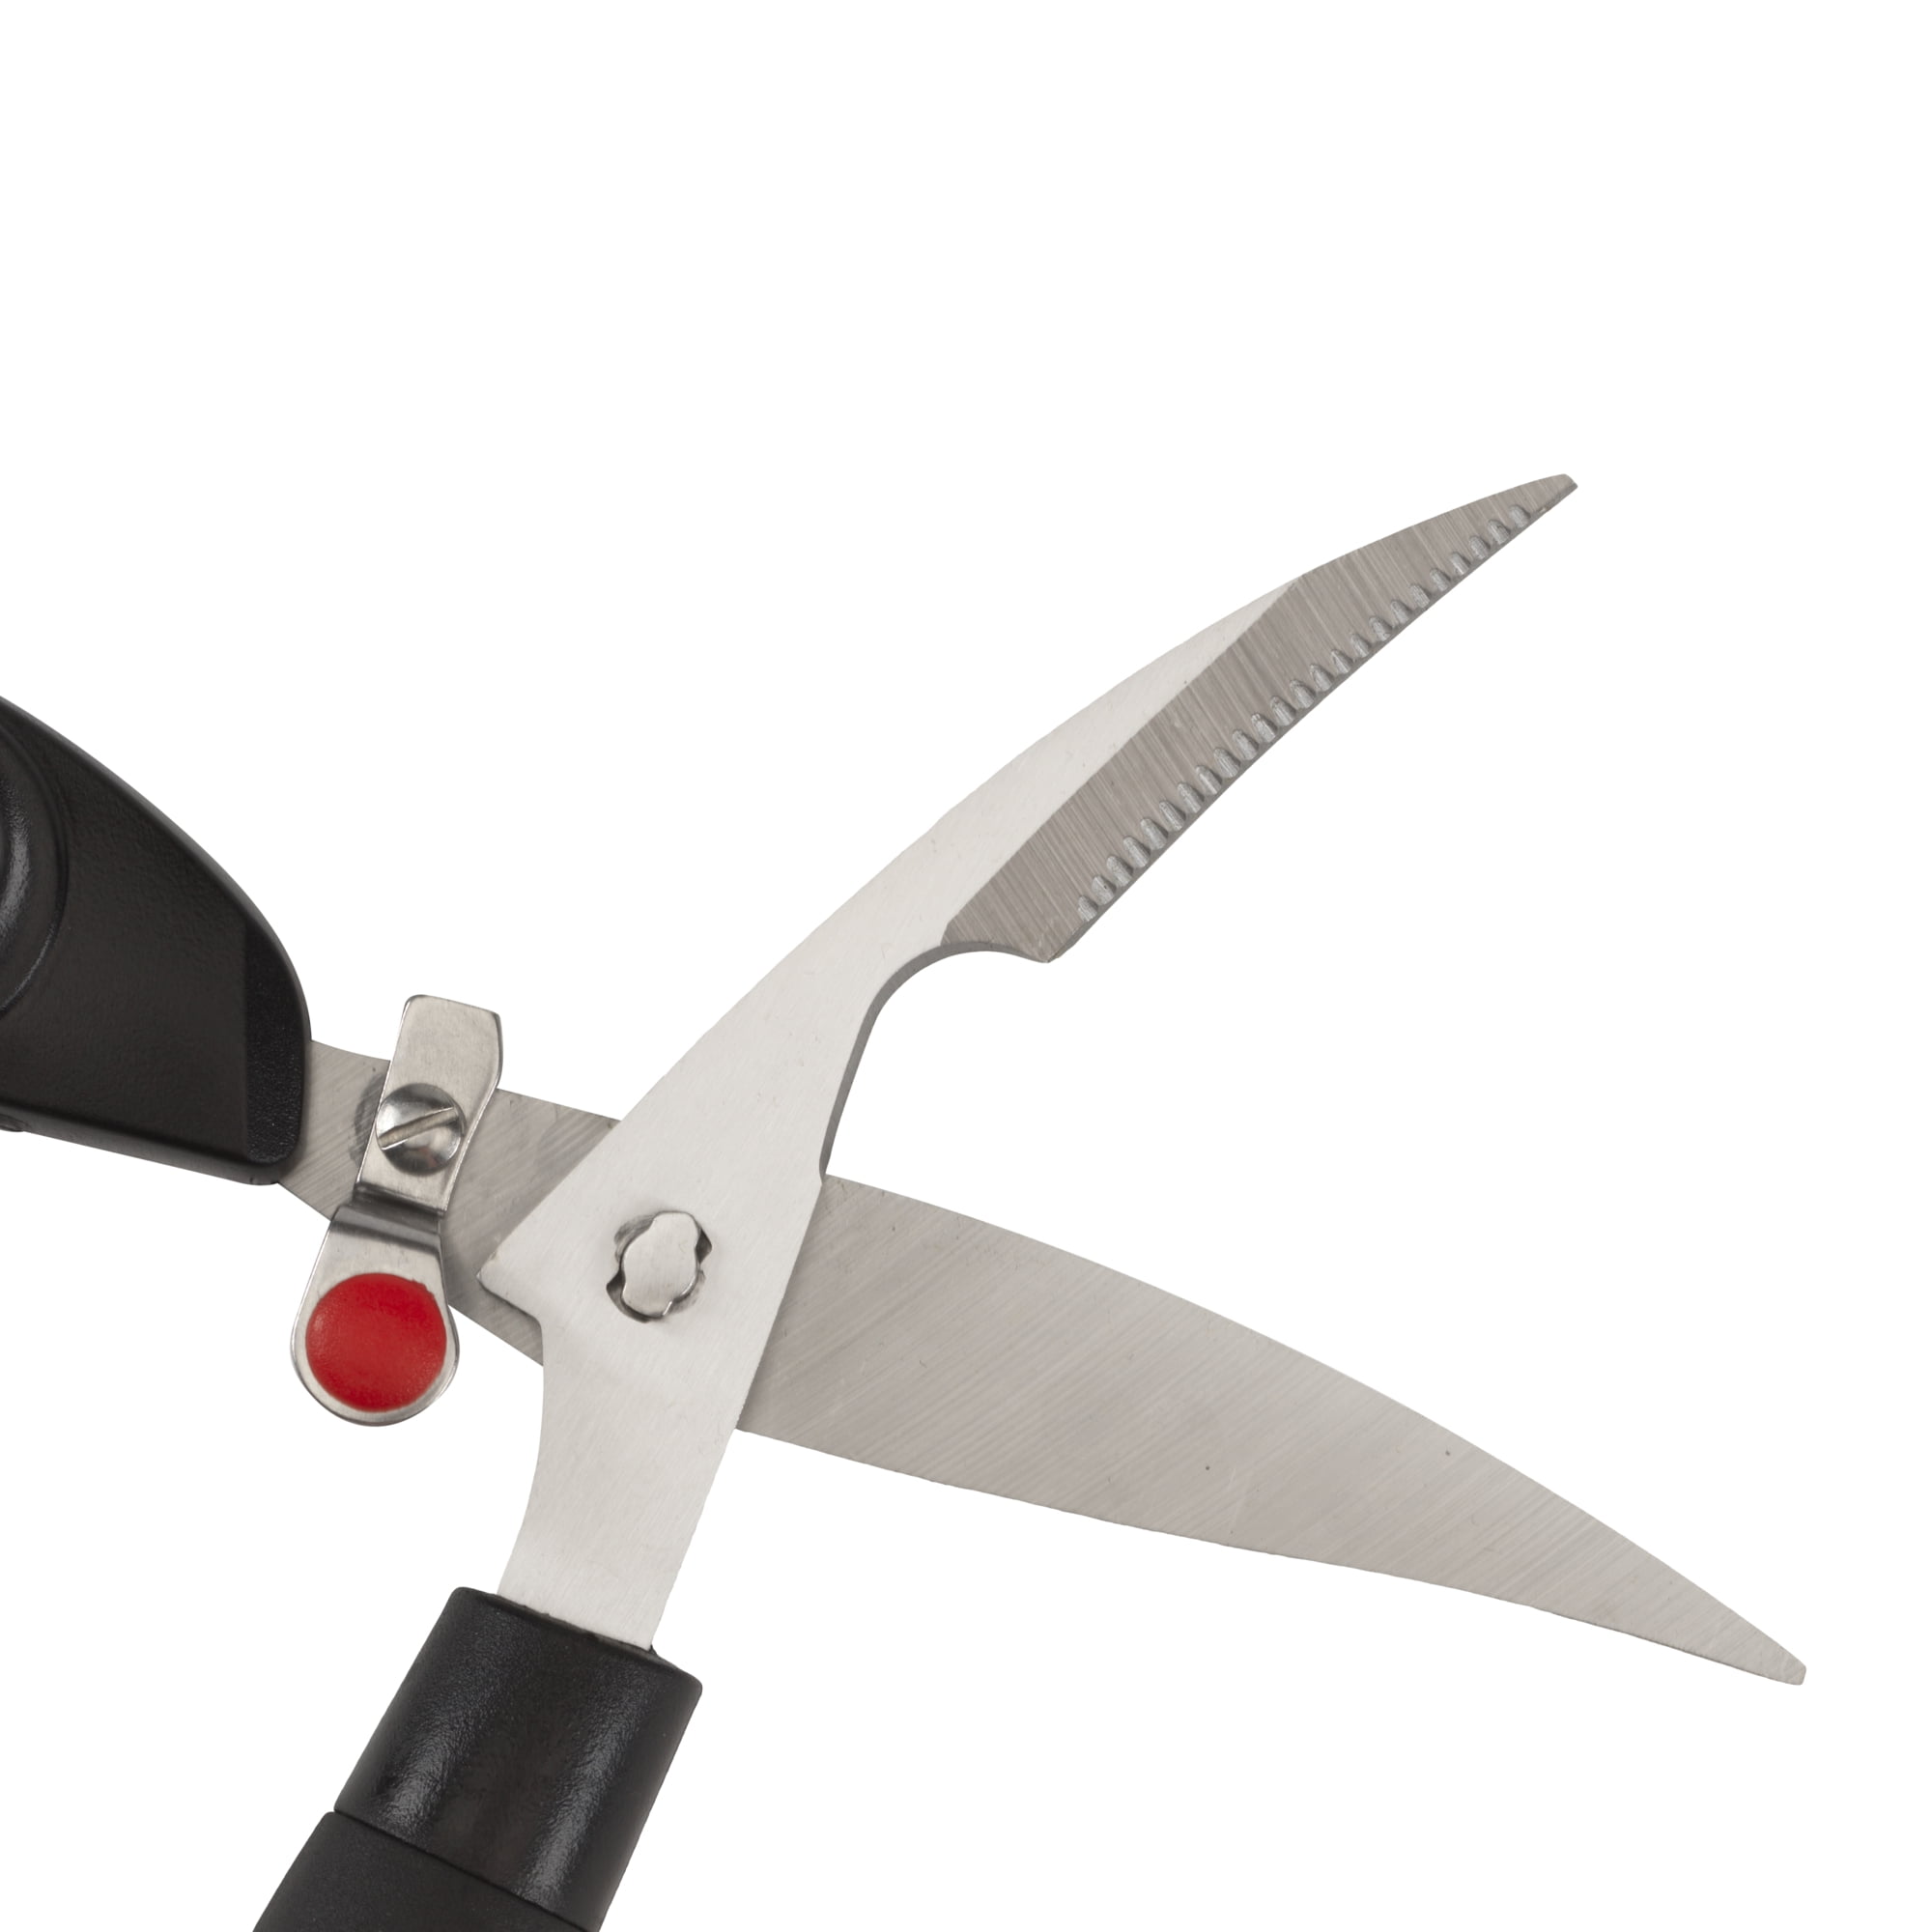 Roots & Harvest Poultry Shears